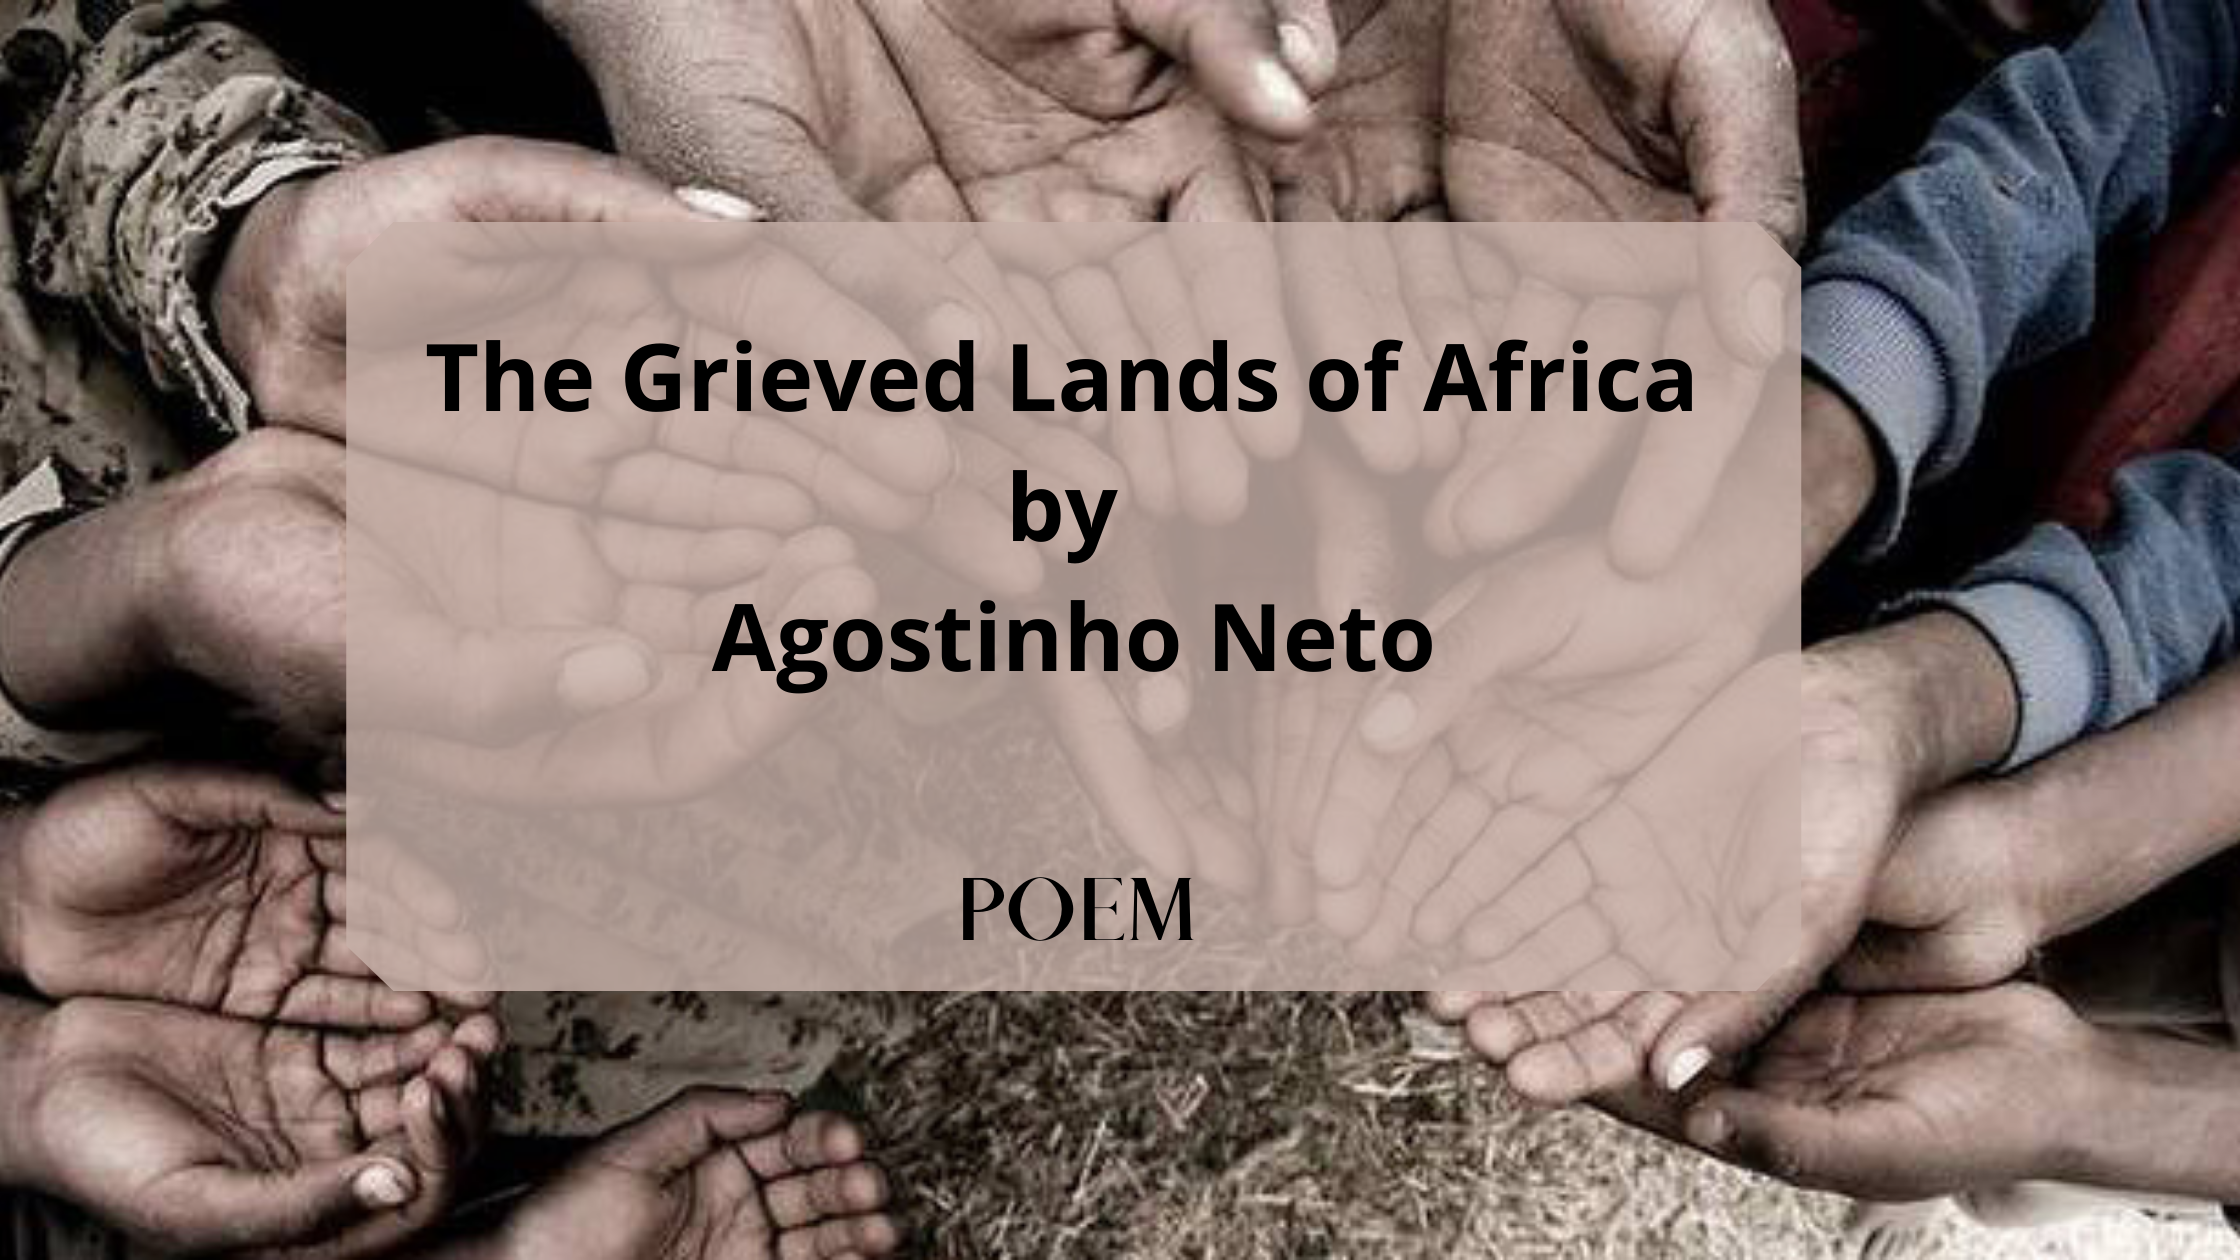 The grieved lands of Africa